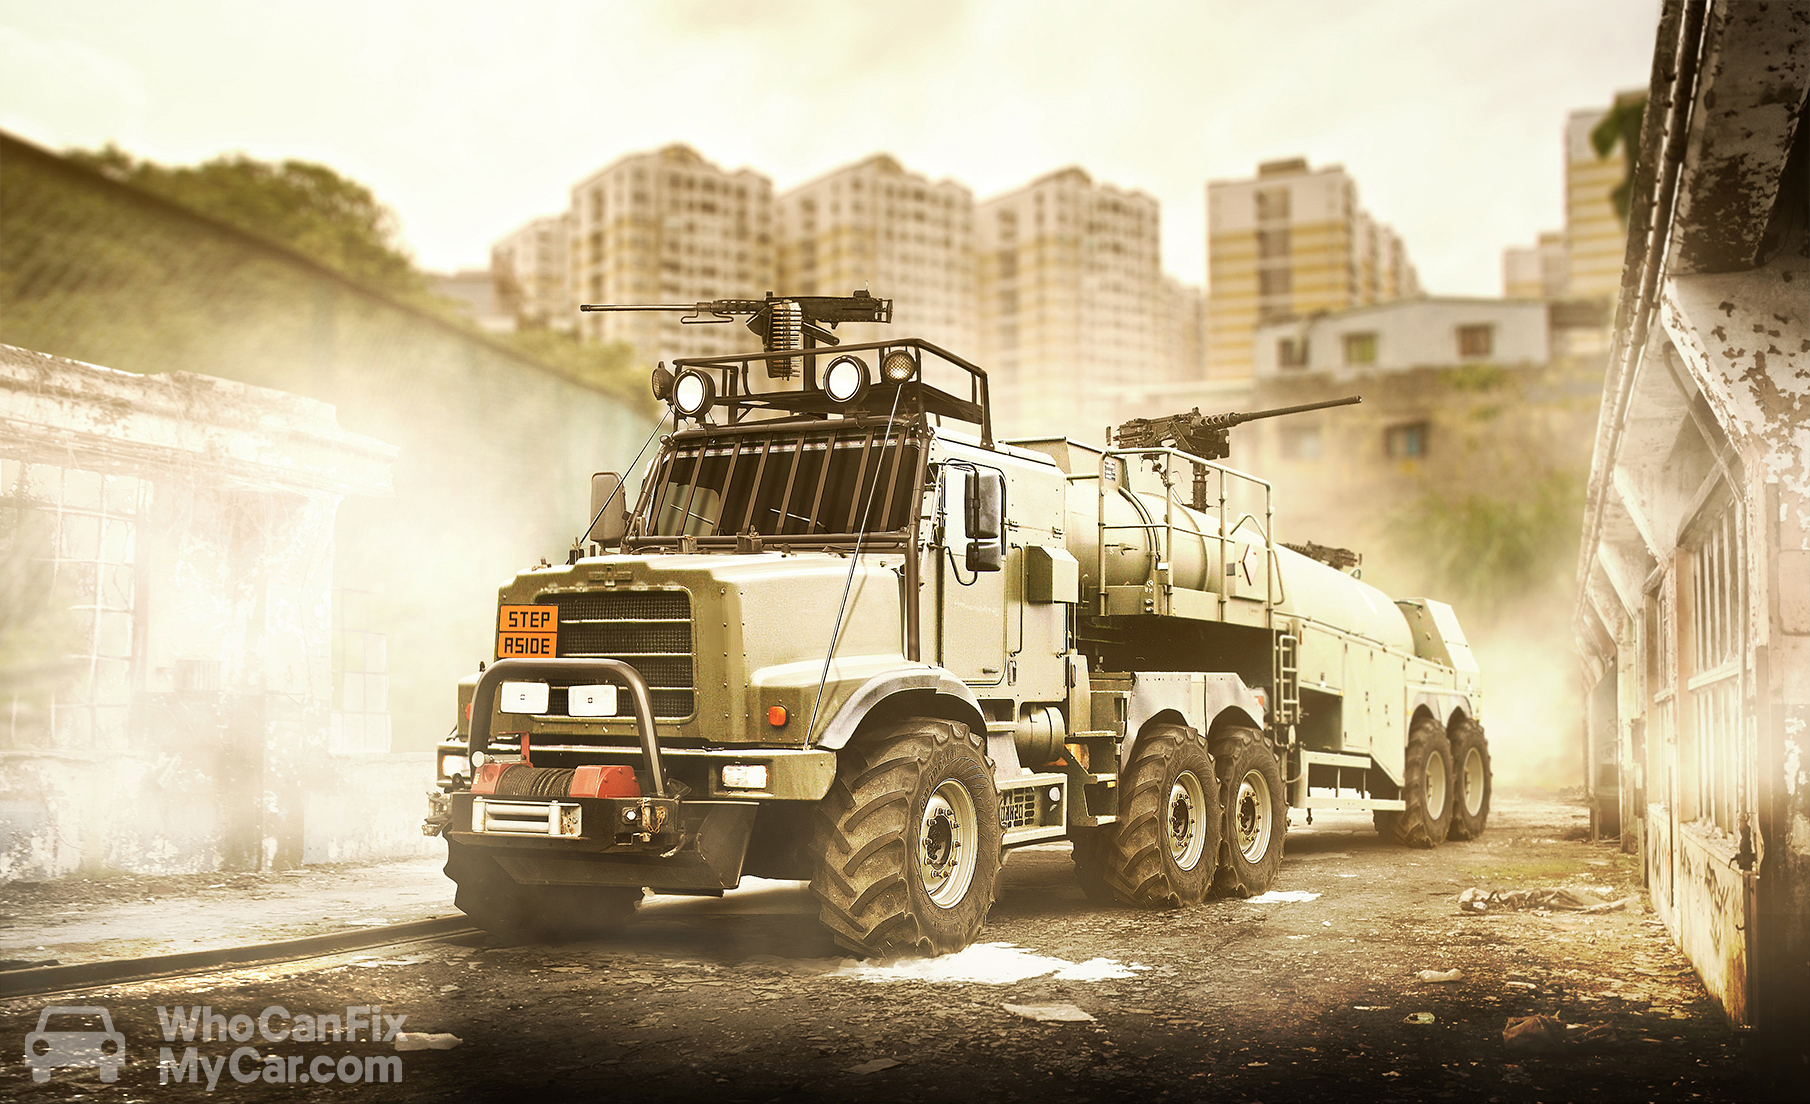 Here are seven doomsday cars to get you through the impending apocalypse Oshkosh Wheeled Tanker